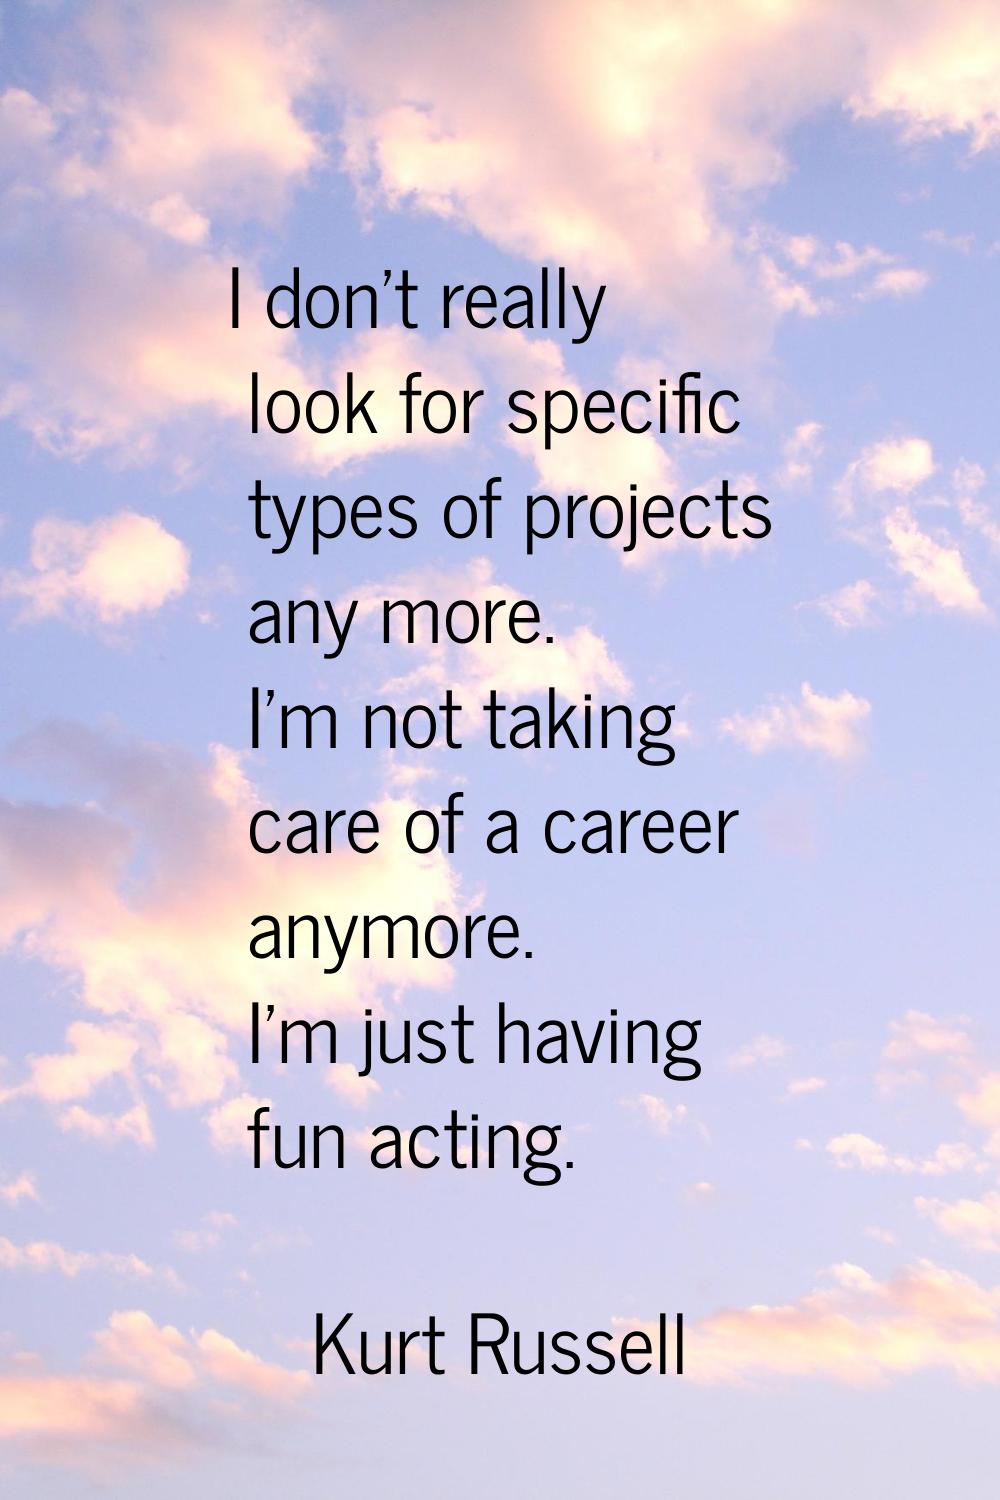 I don't really look for specific types of projects any more. I'm not taking care of a career anymor